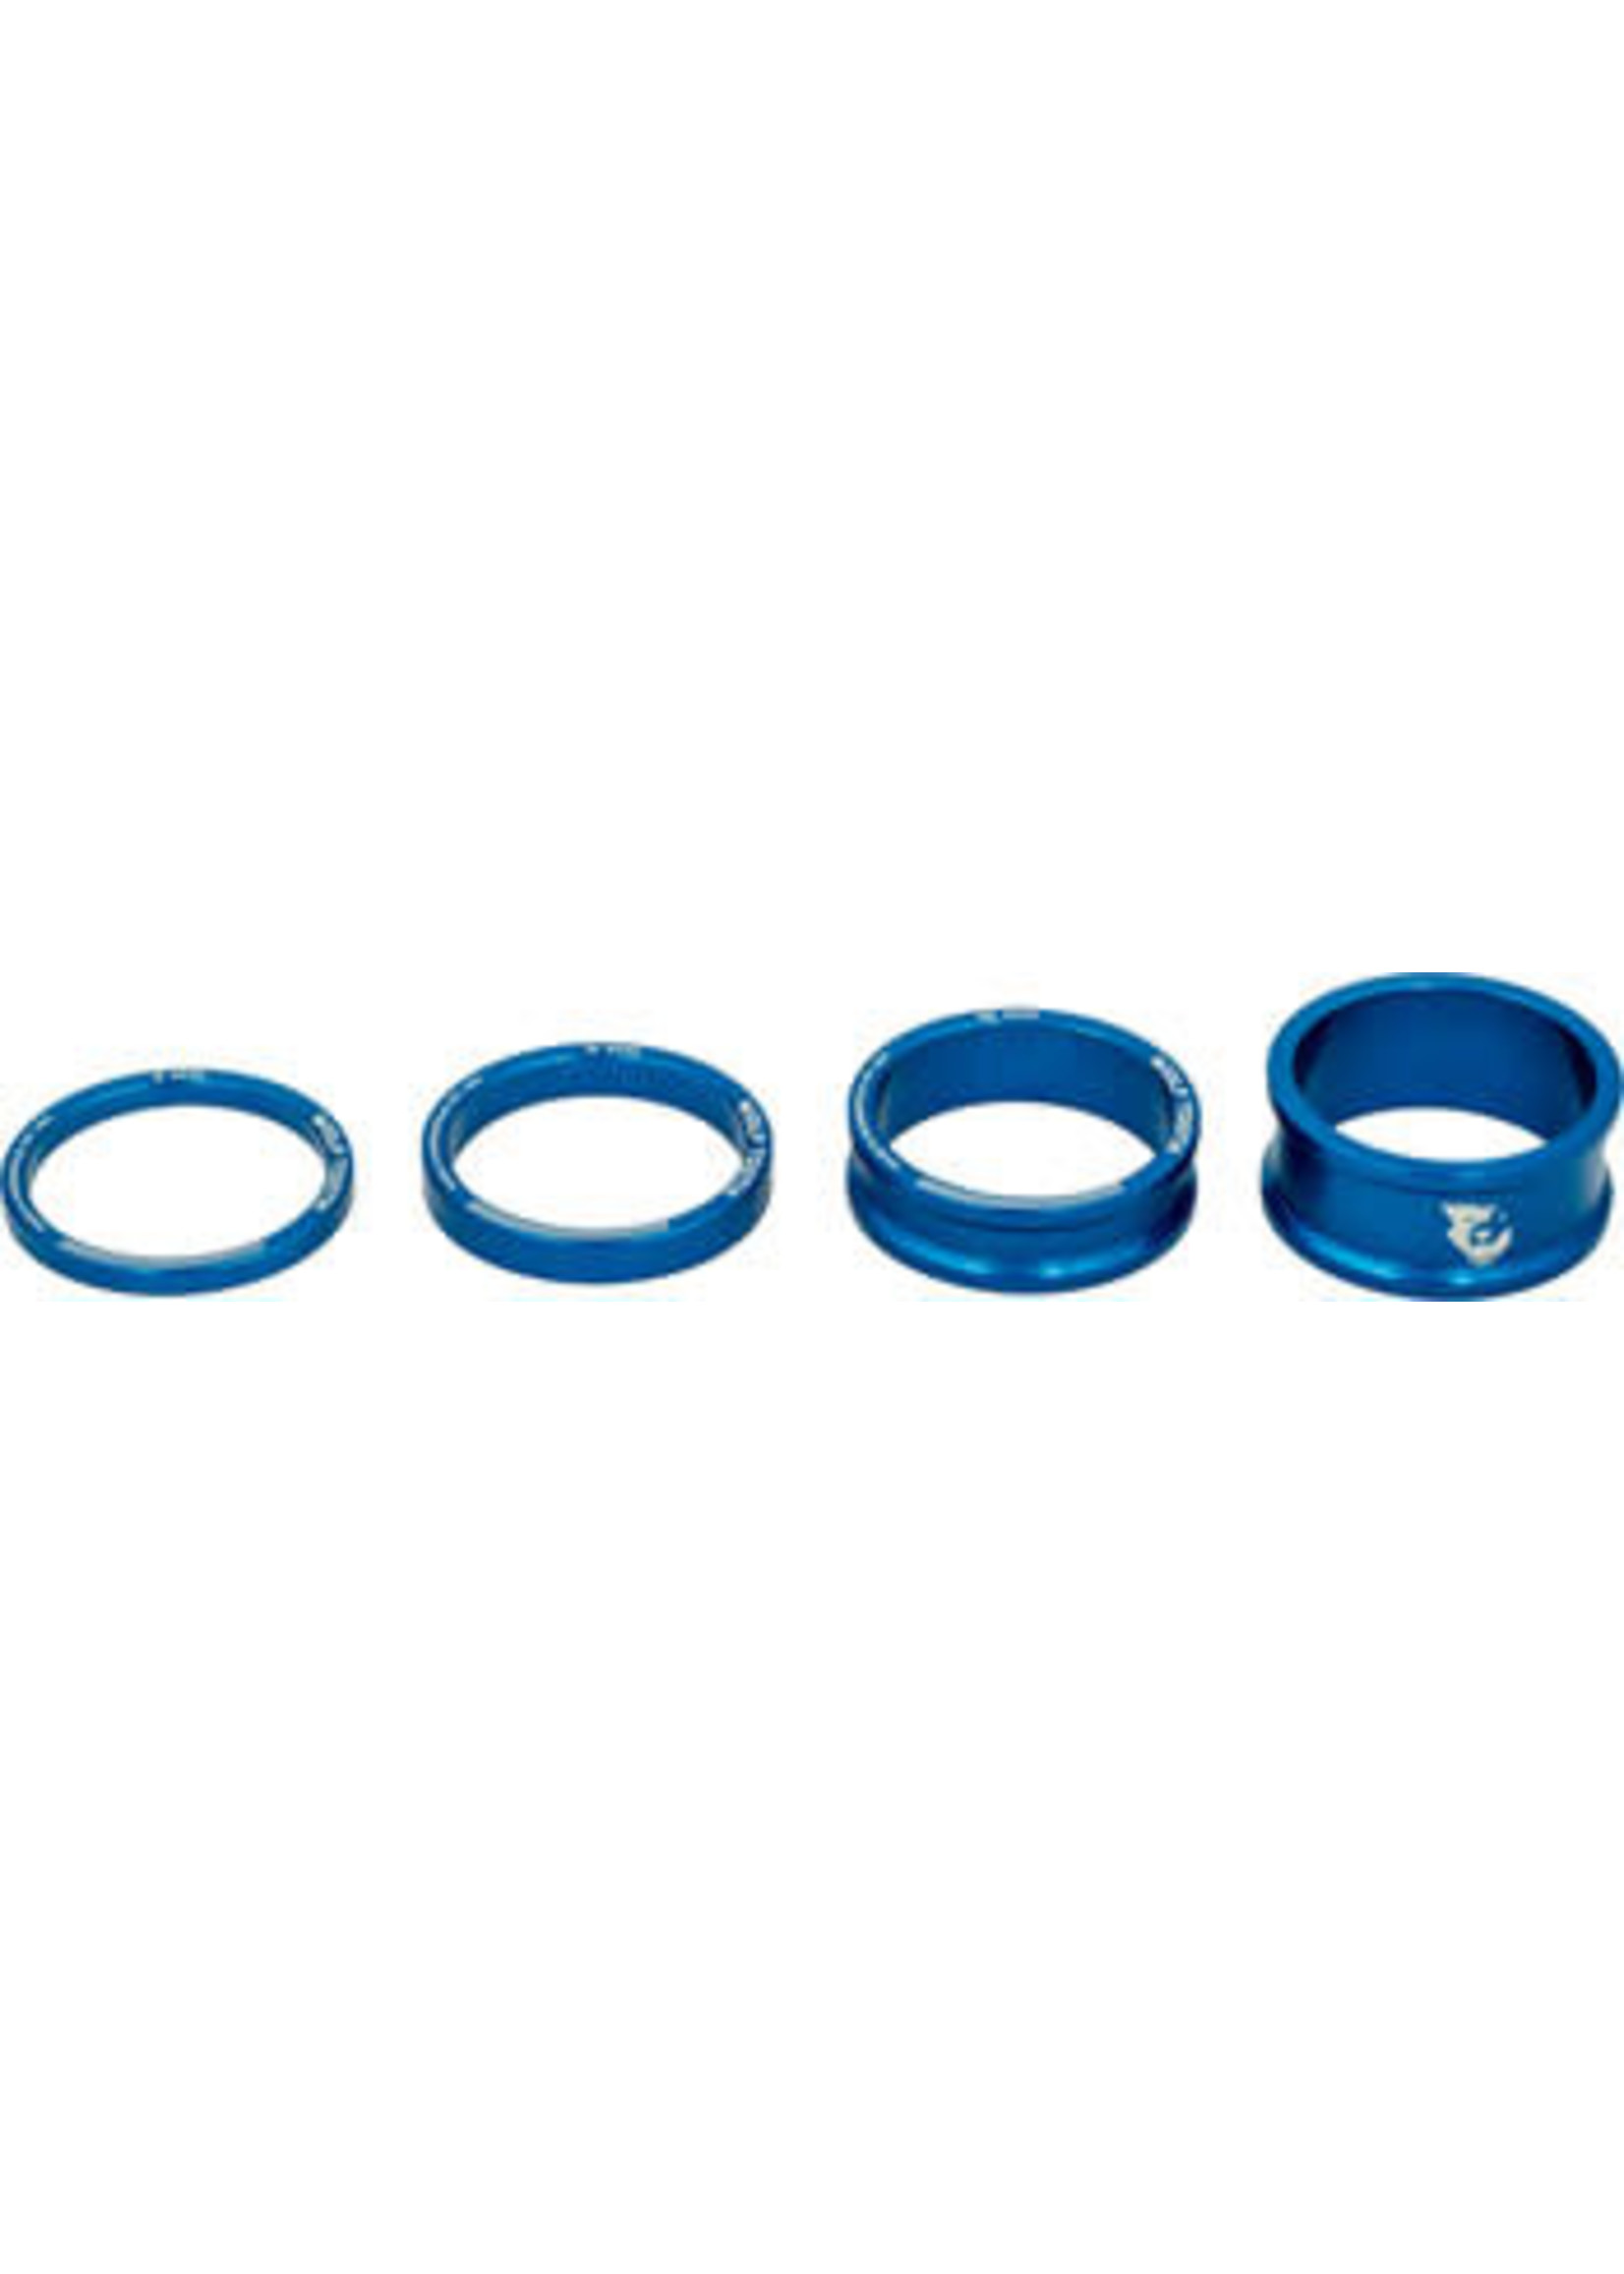 Wolf Tooth Wolf Tooth Headset Spacer Kit 3, 5, 10, 15mm, Blue